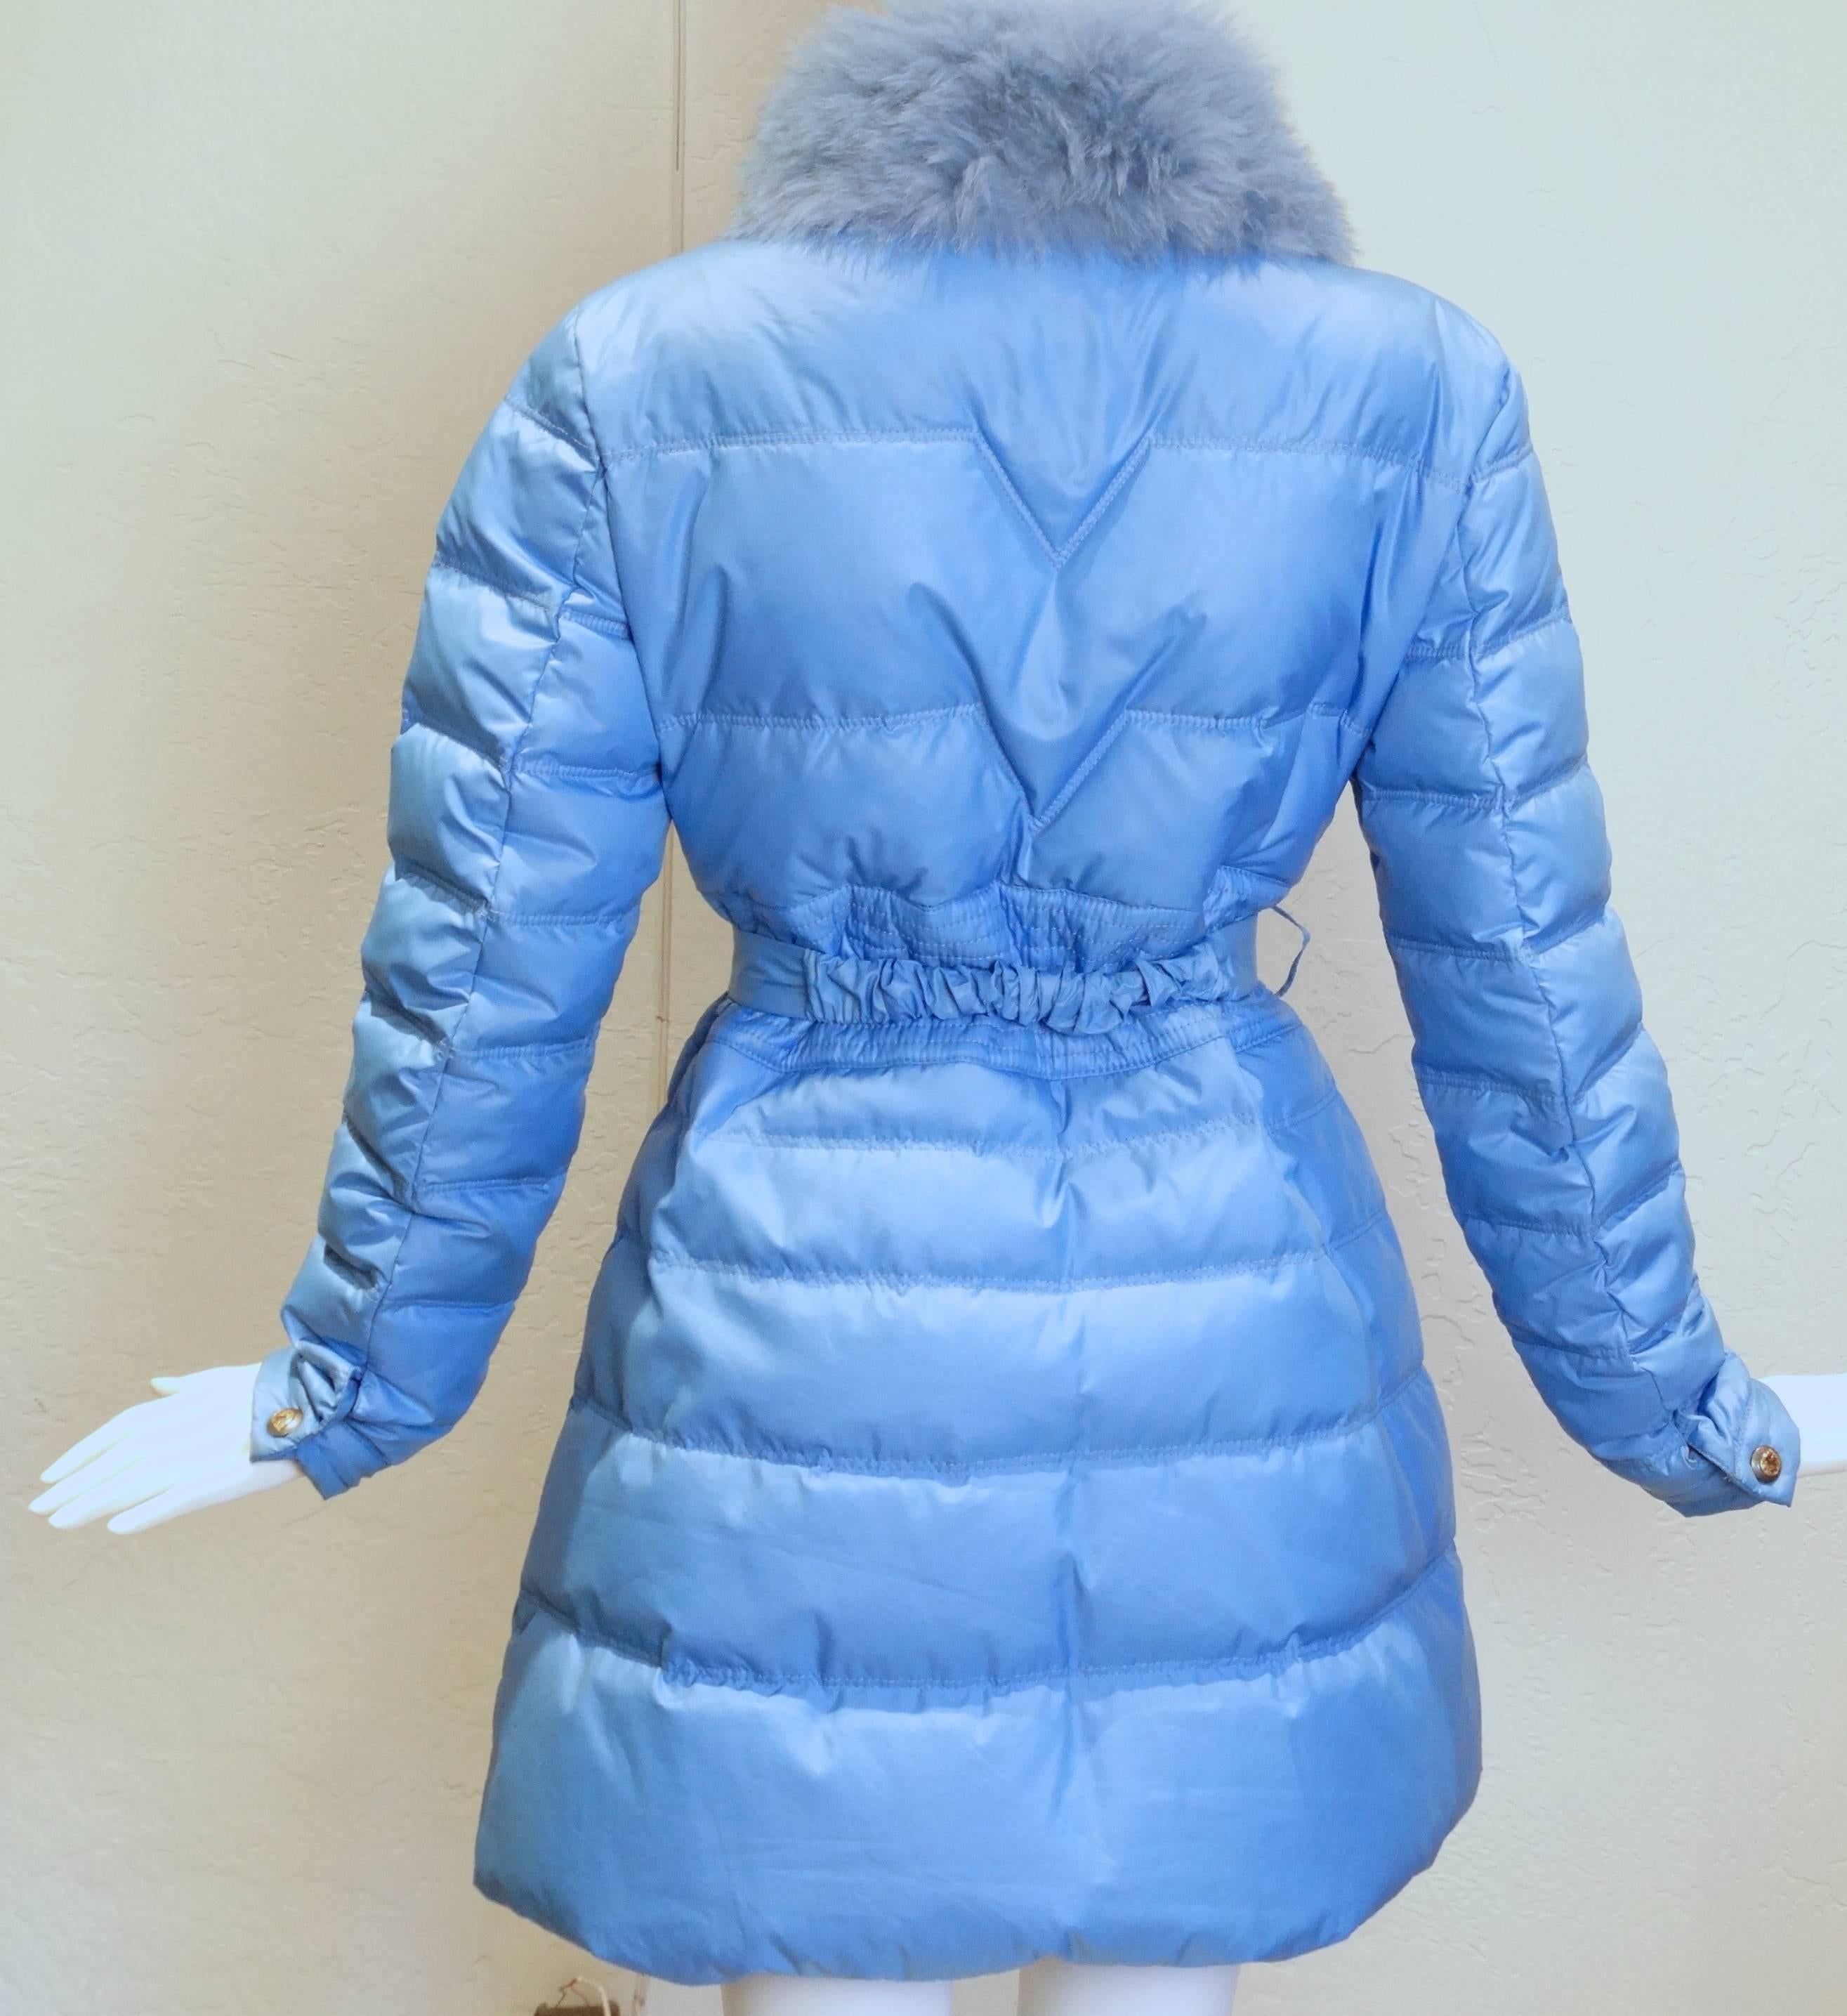 2013 Versace Collection Puffer Jacket with Fur Collar  1